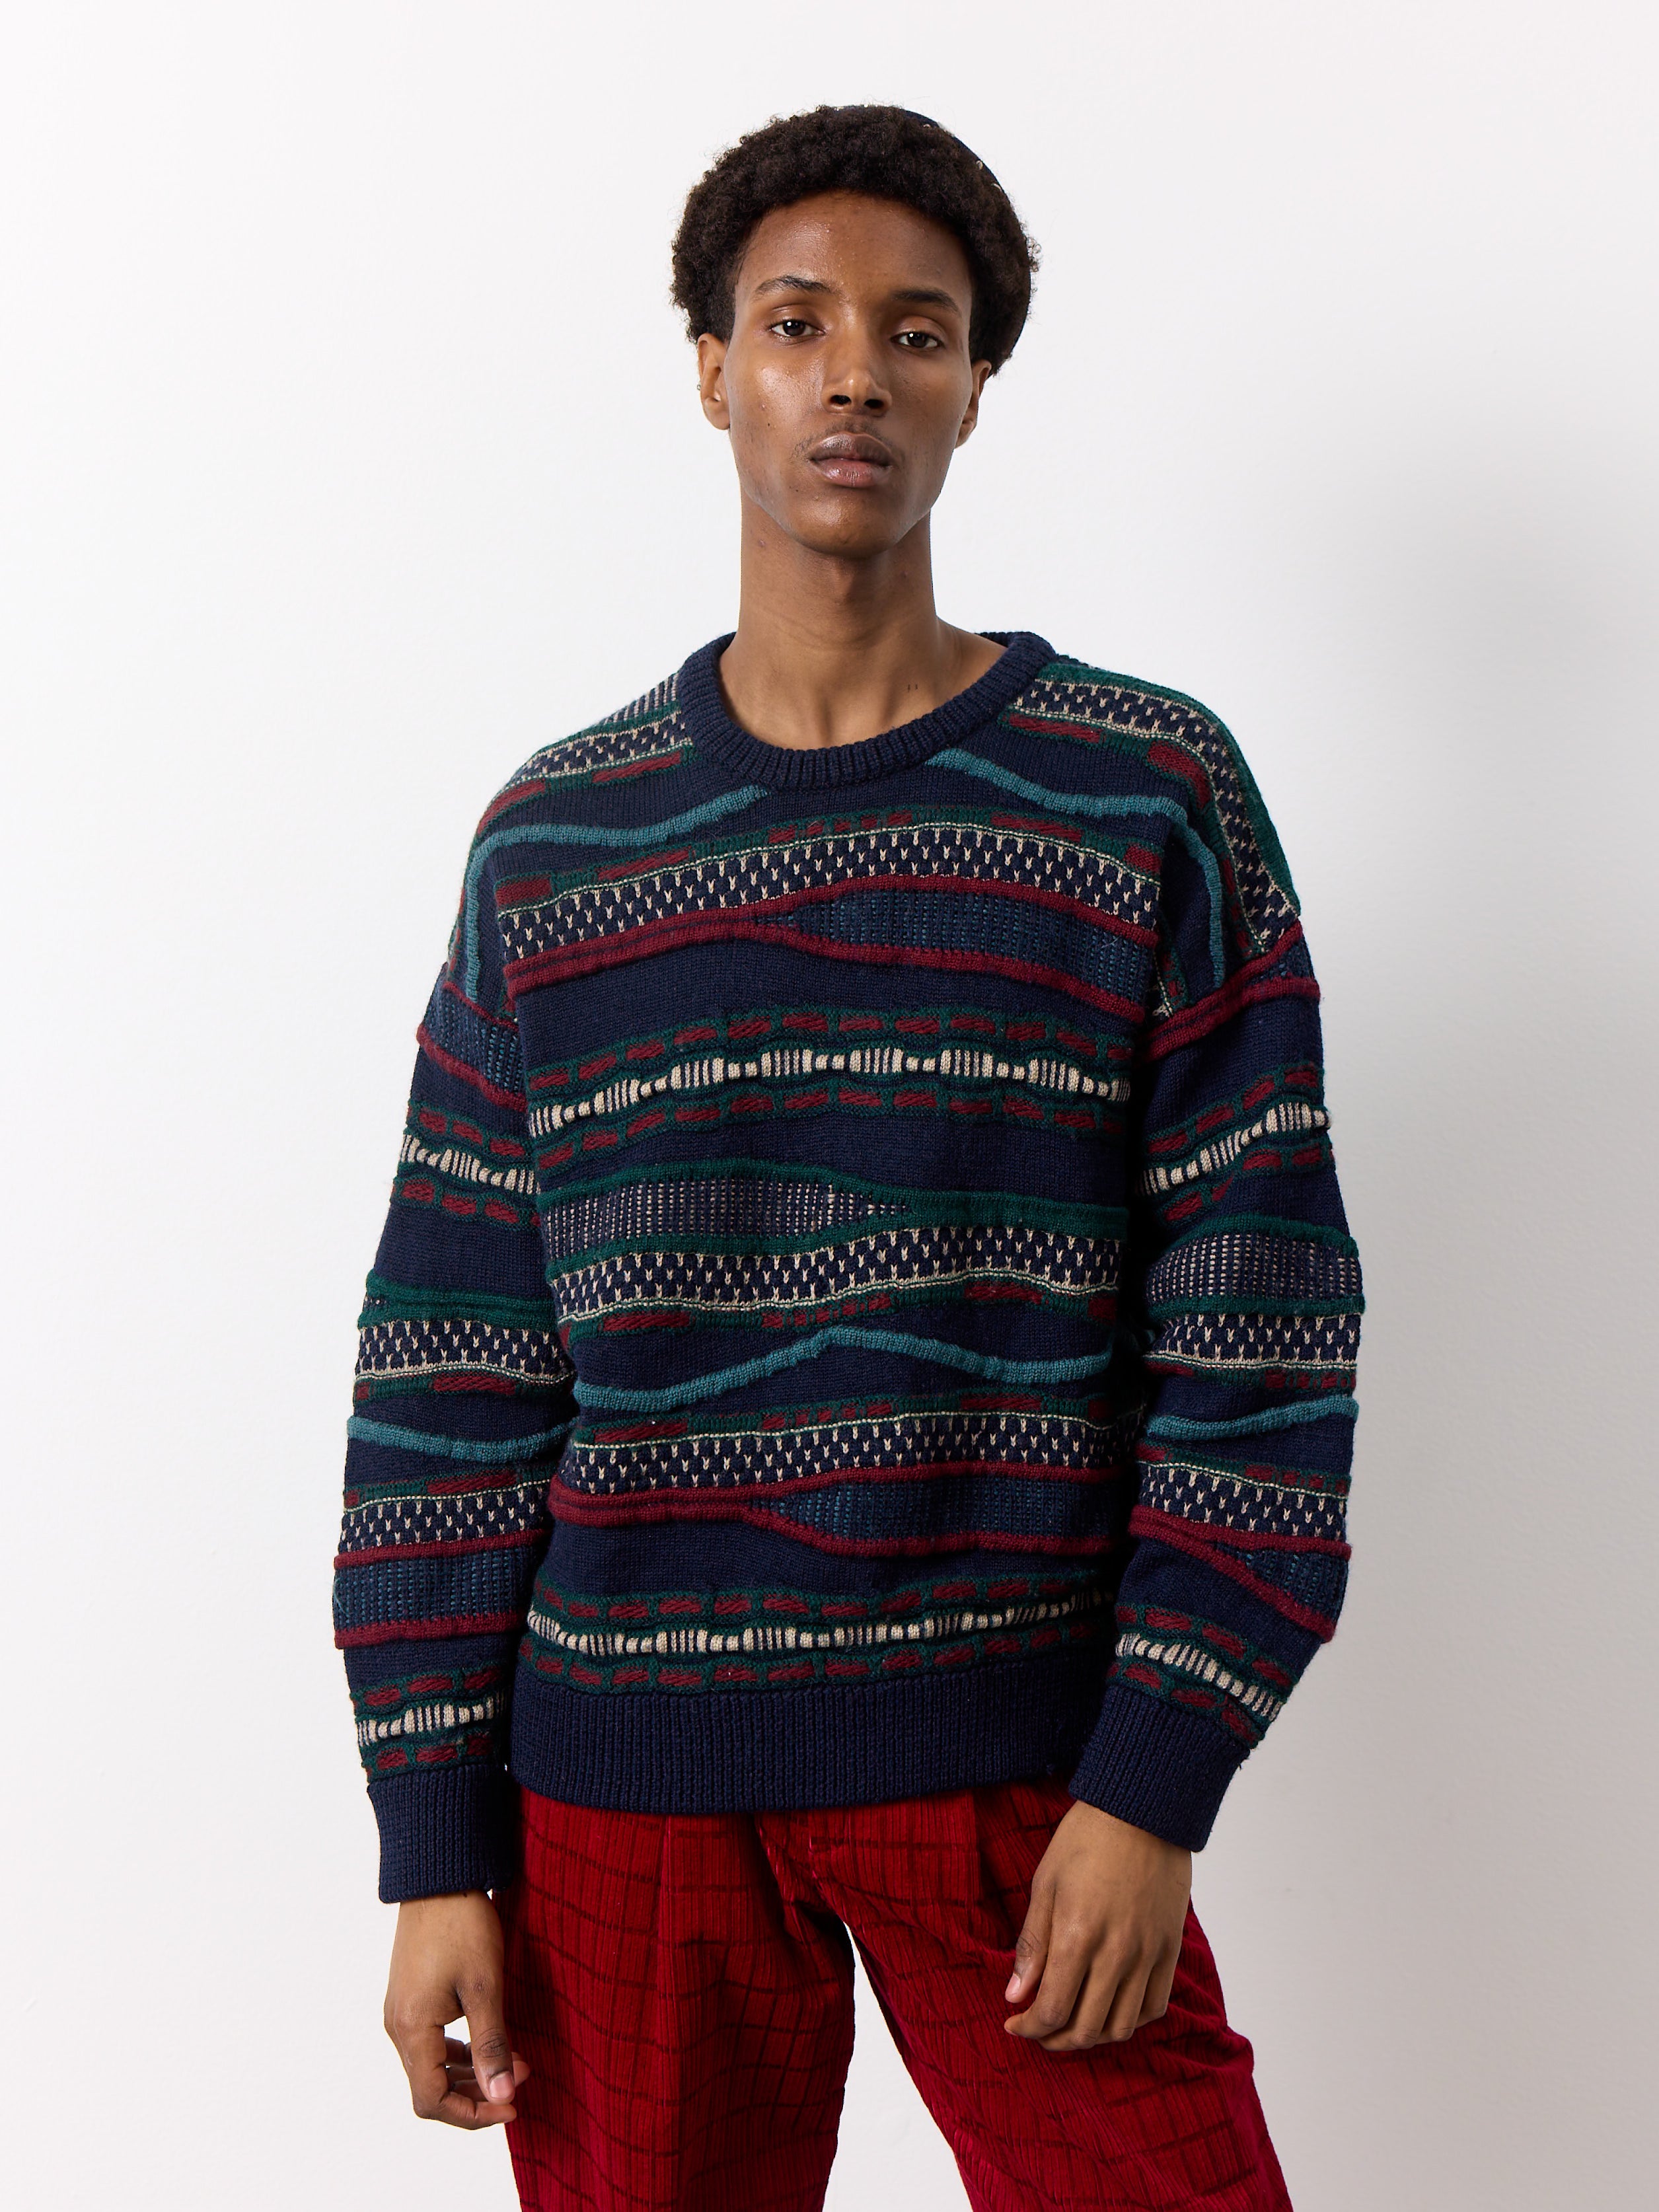 Expertly crafted knit sweater featuring a timeless Coogi-inspired design. The thick, three-dimensional knit adds a touch of boldness to this minimalist piece.